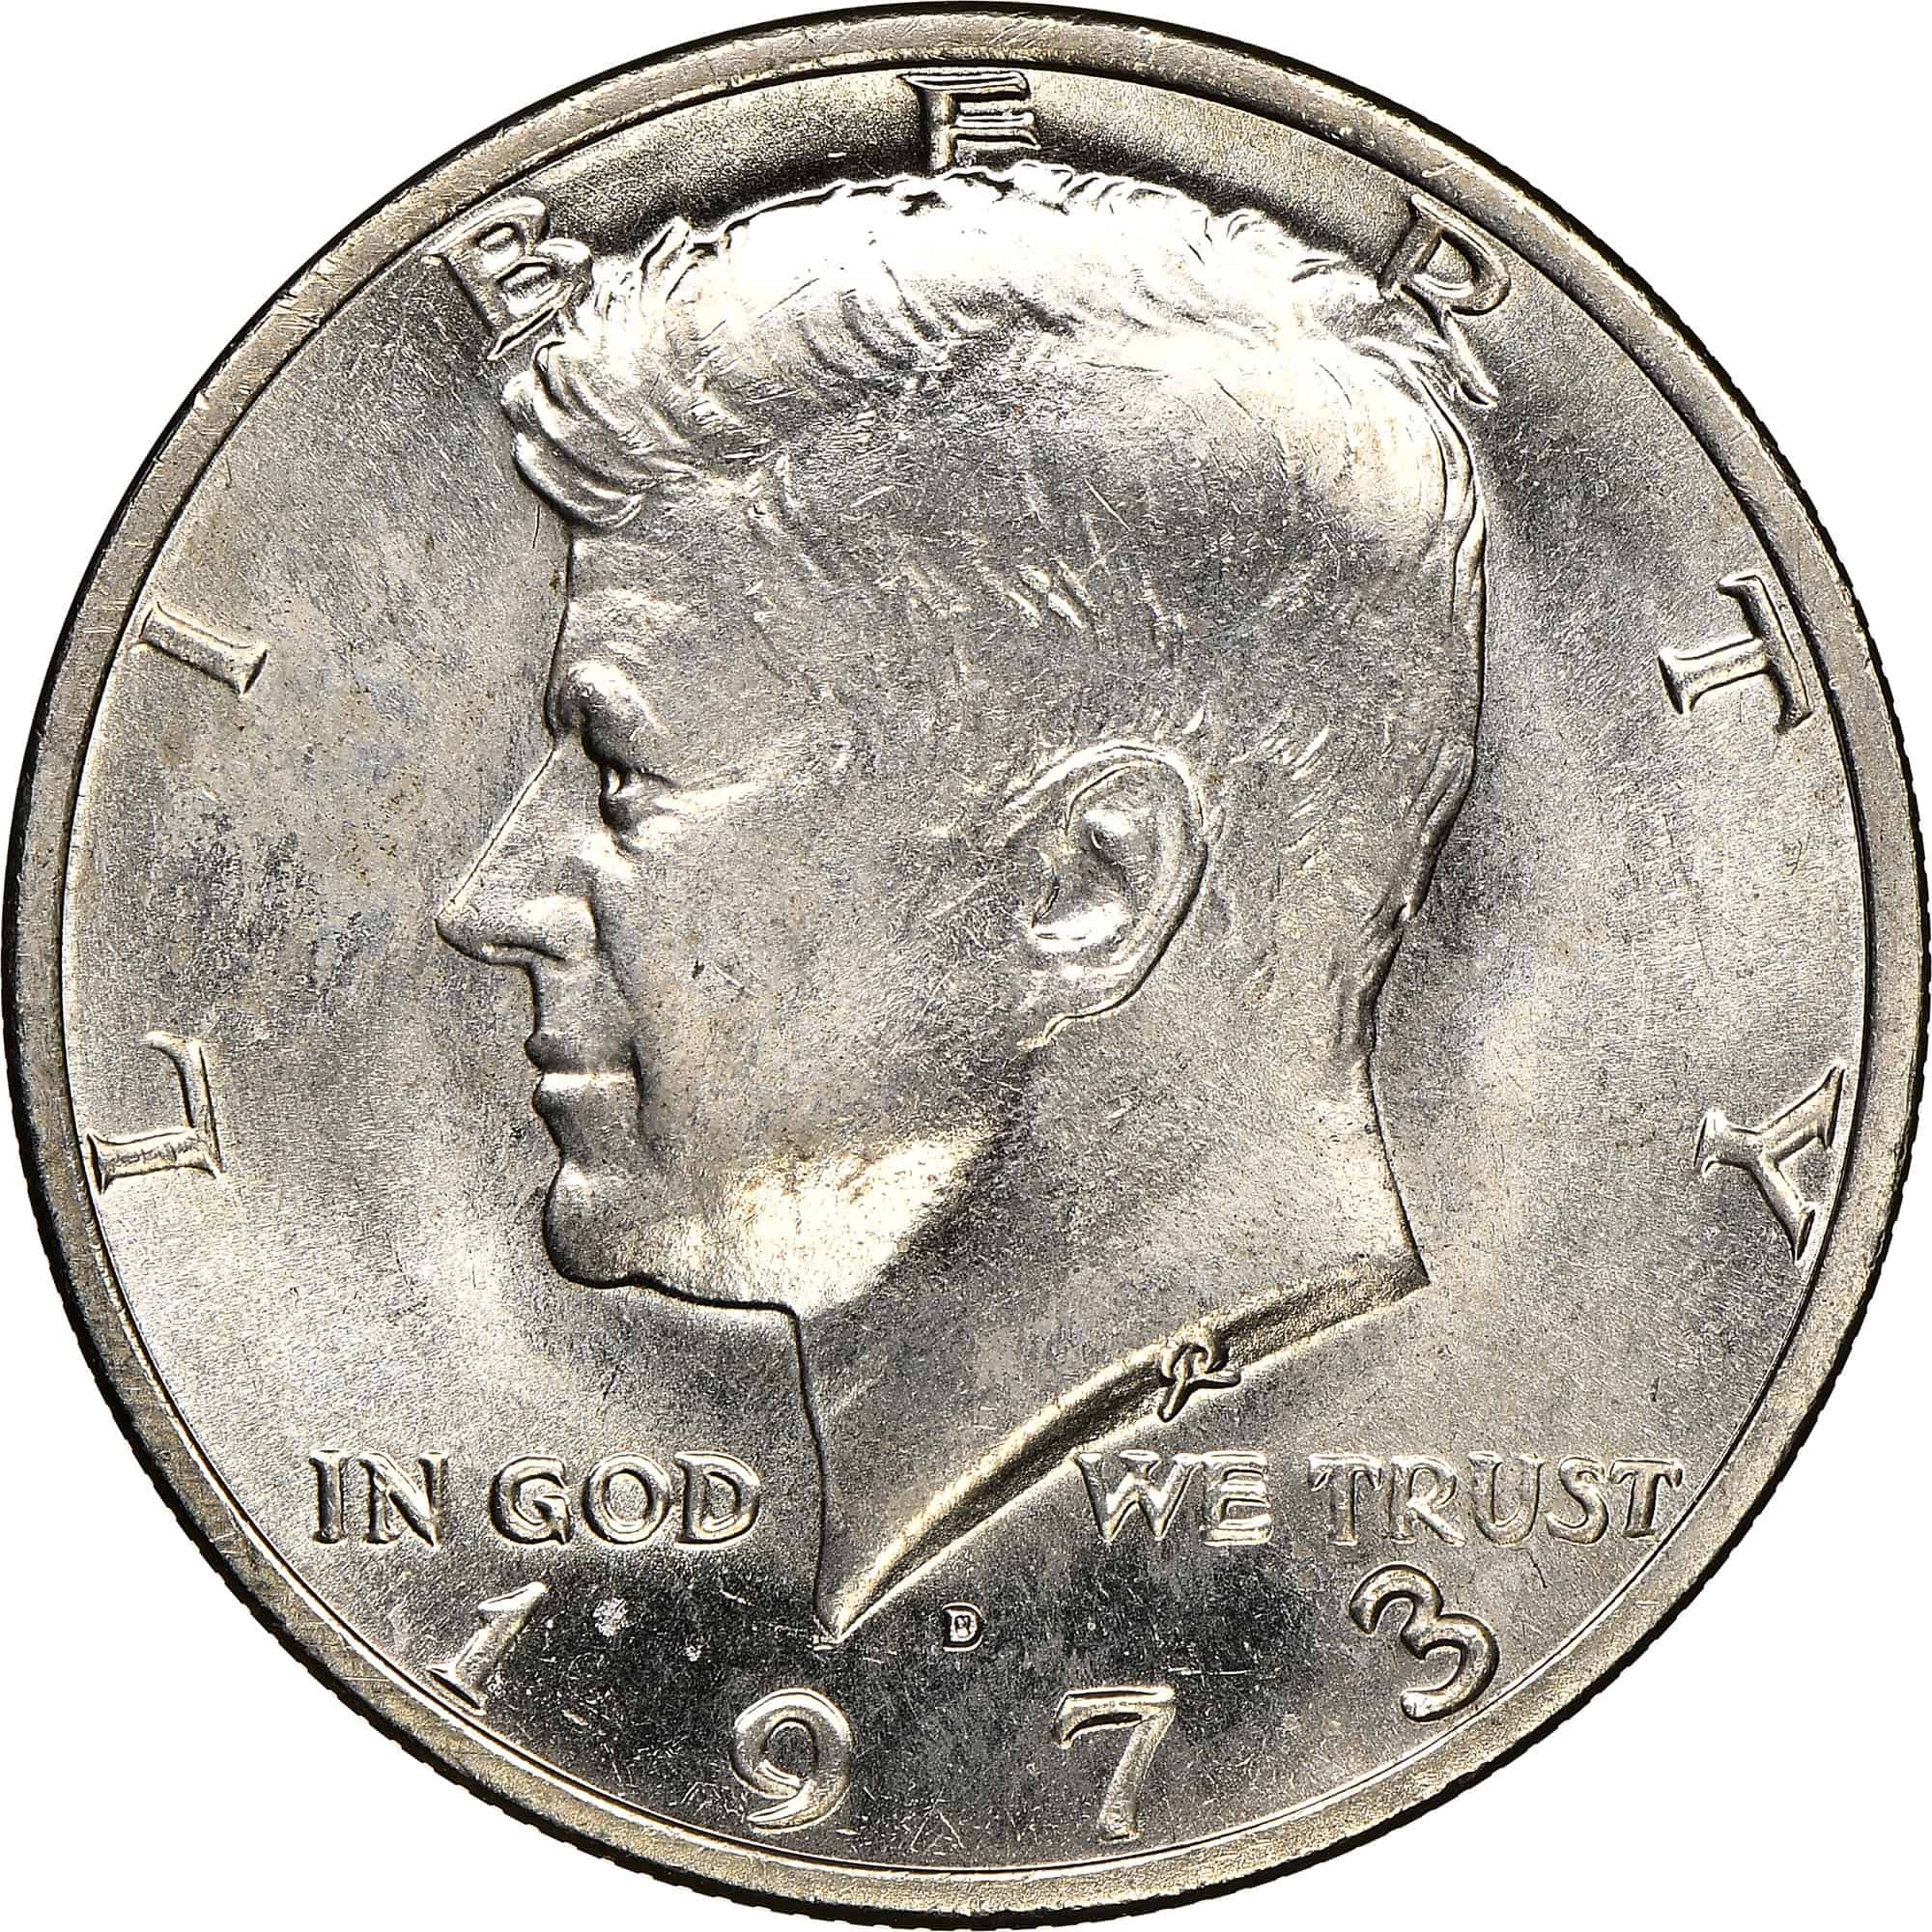 The Obverse of the 1973 Half Dollar